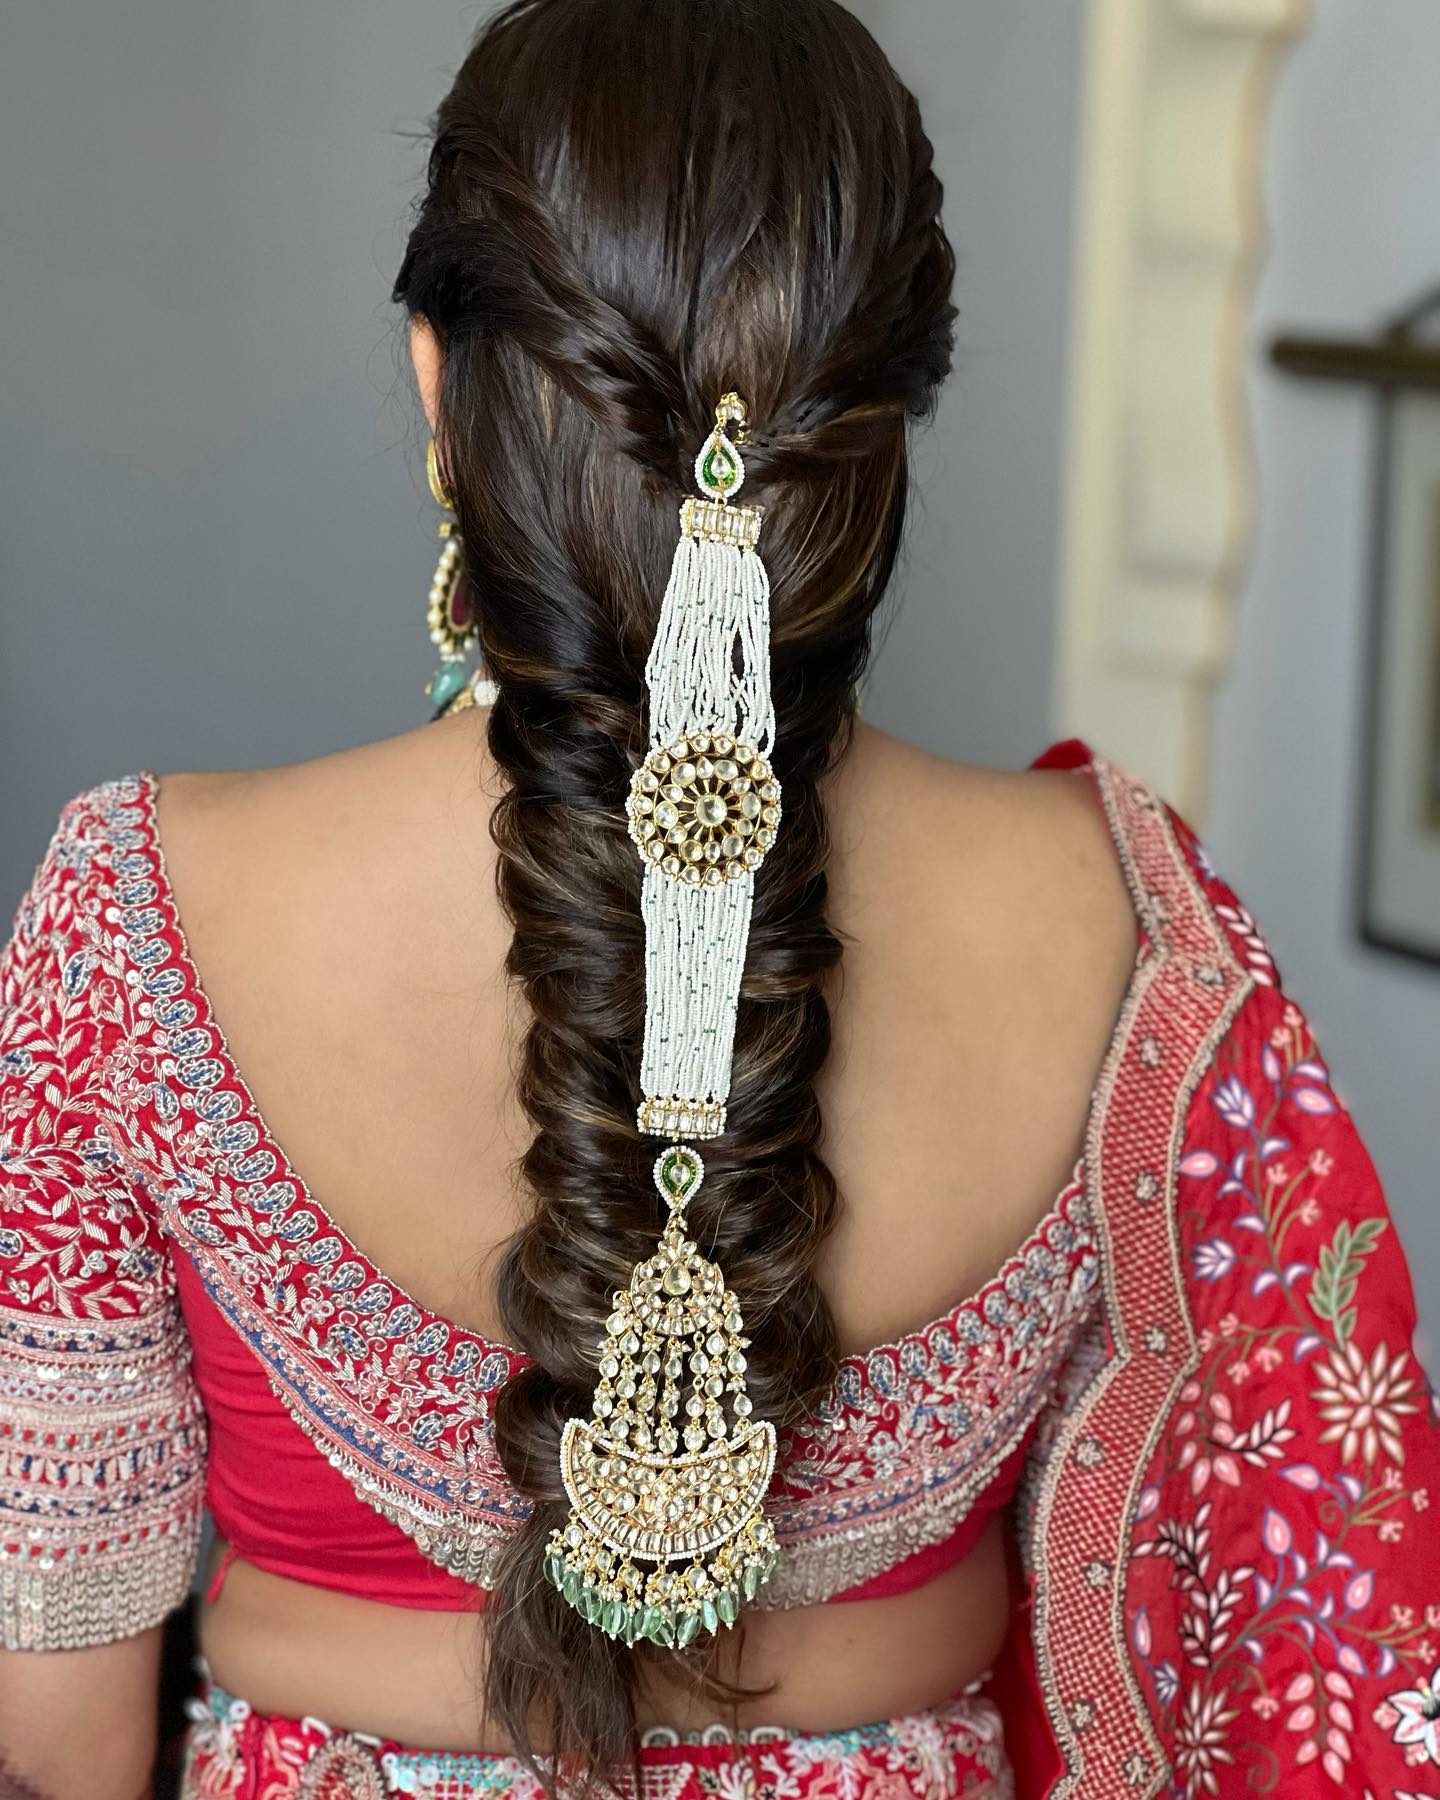 4 New & Gorgeous Open Hairstyles For Lehenga | Simple Hairstyle - YouTube-hkpdtq2012.edu.vn